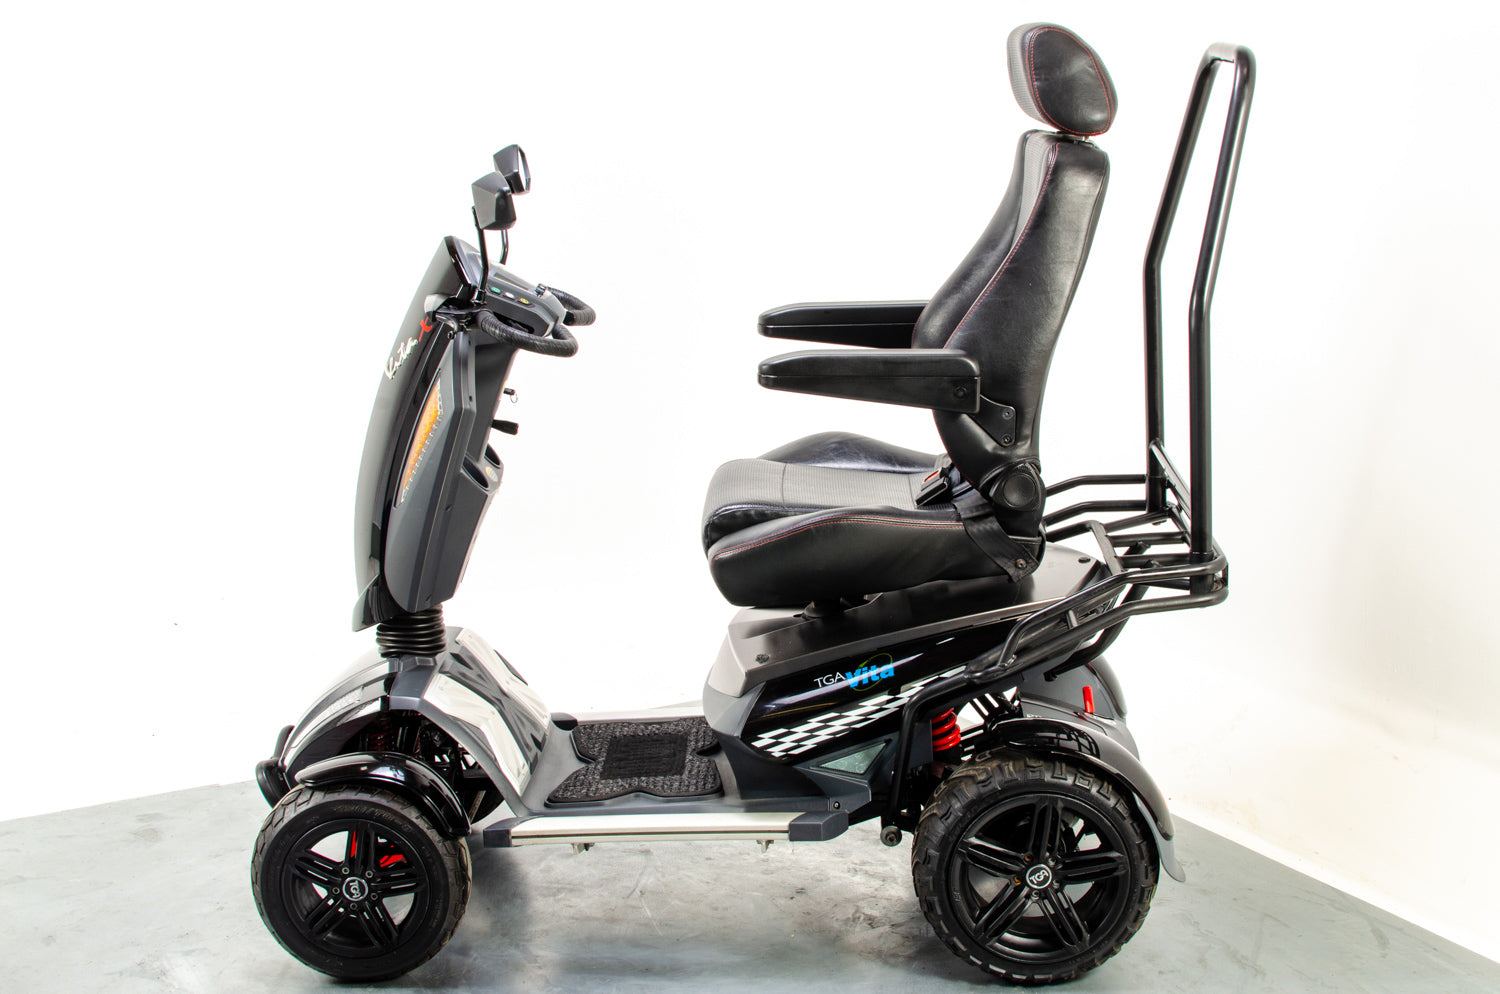 TGA Vita X Used Mobility Scooter 8mph All-Terrain Off-Road Large Road Legal